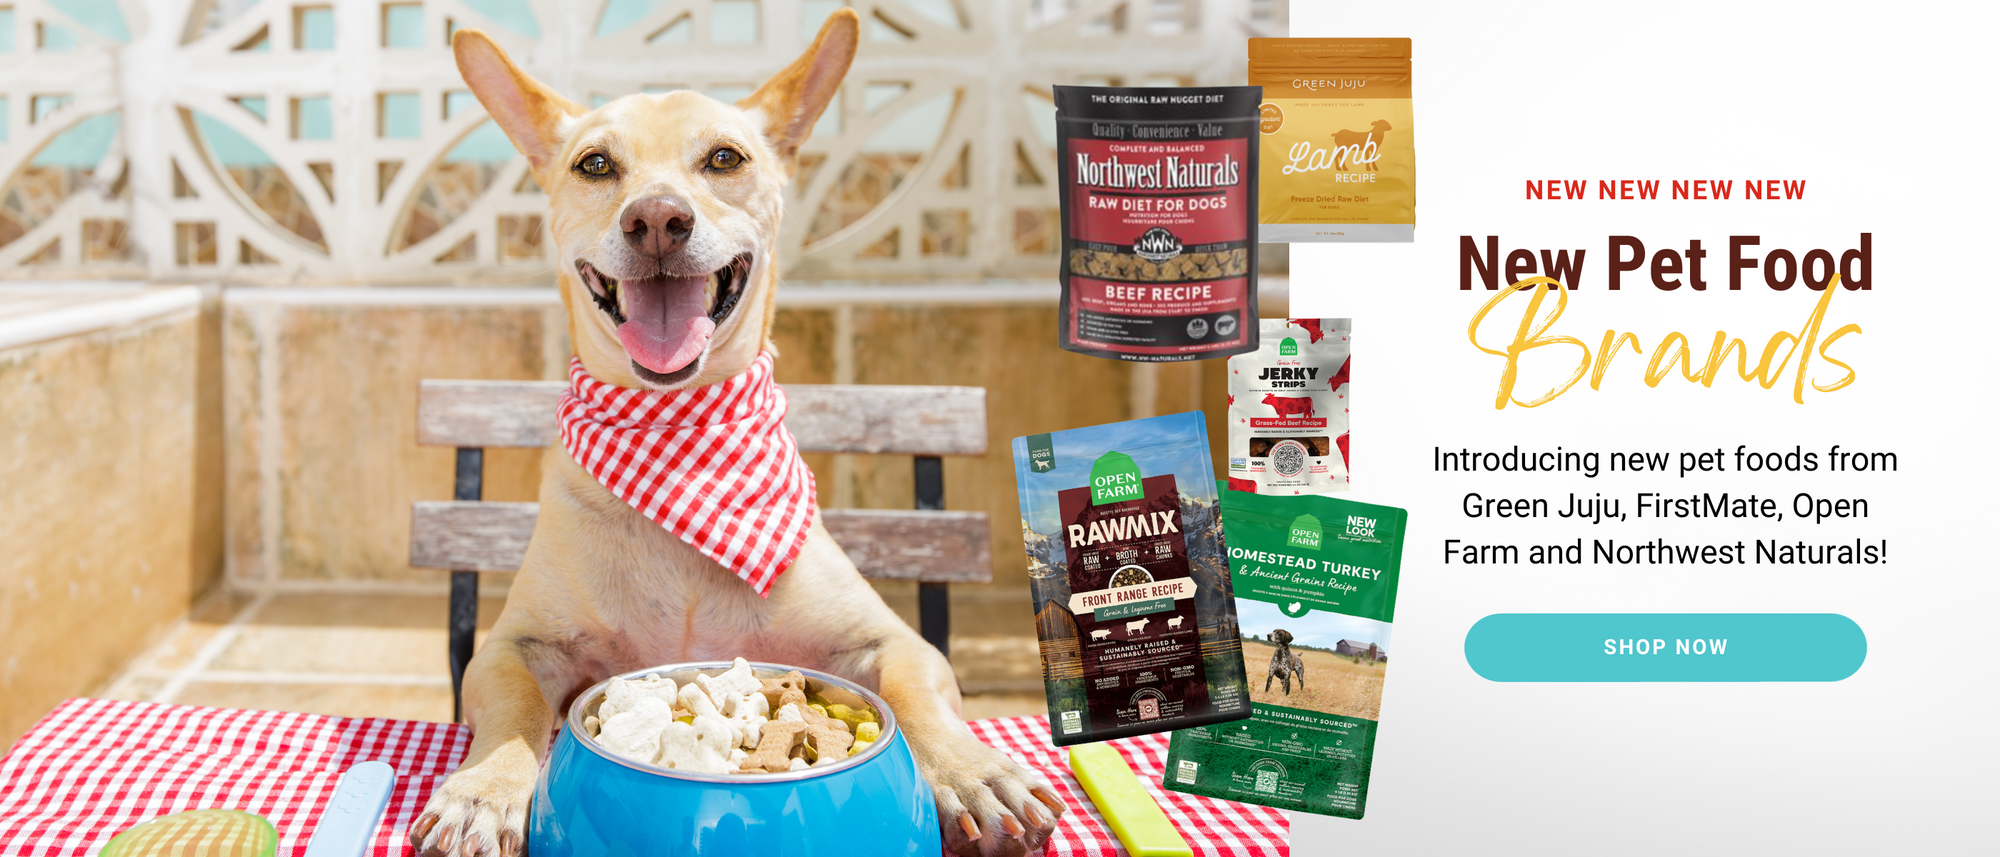 Introducing new pet foods from Green Juju, FirstMate, Open Farm and Northwest Naturals! Shop now!